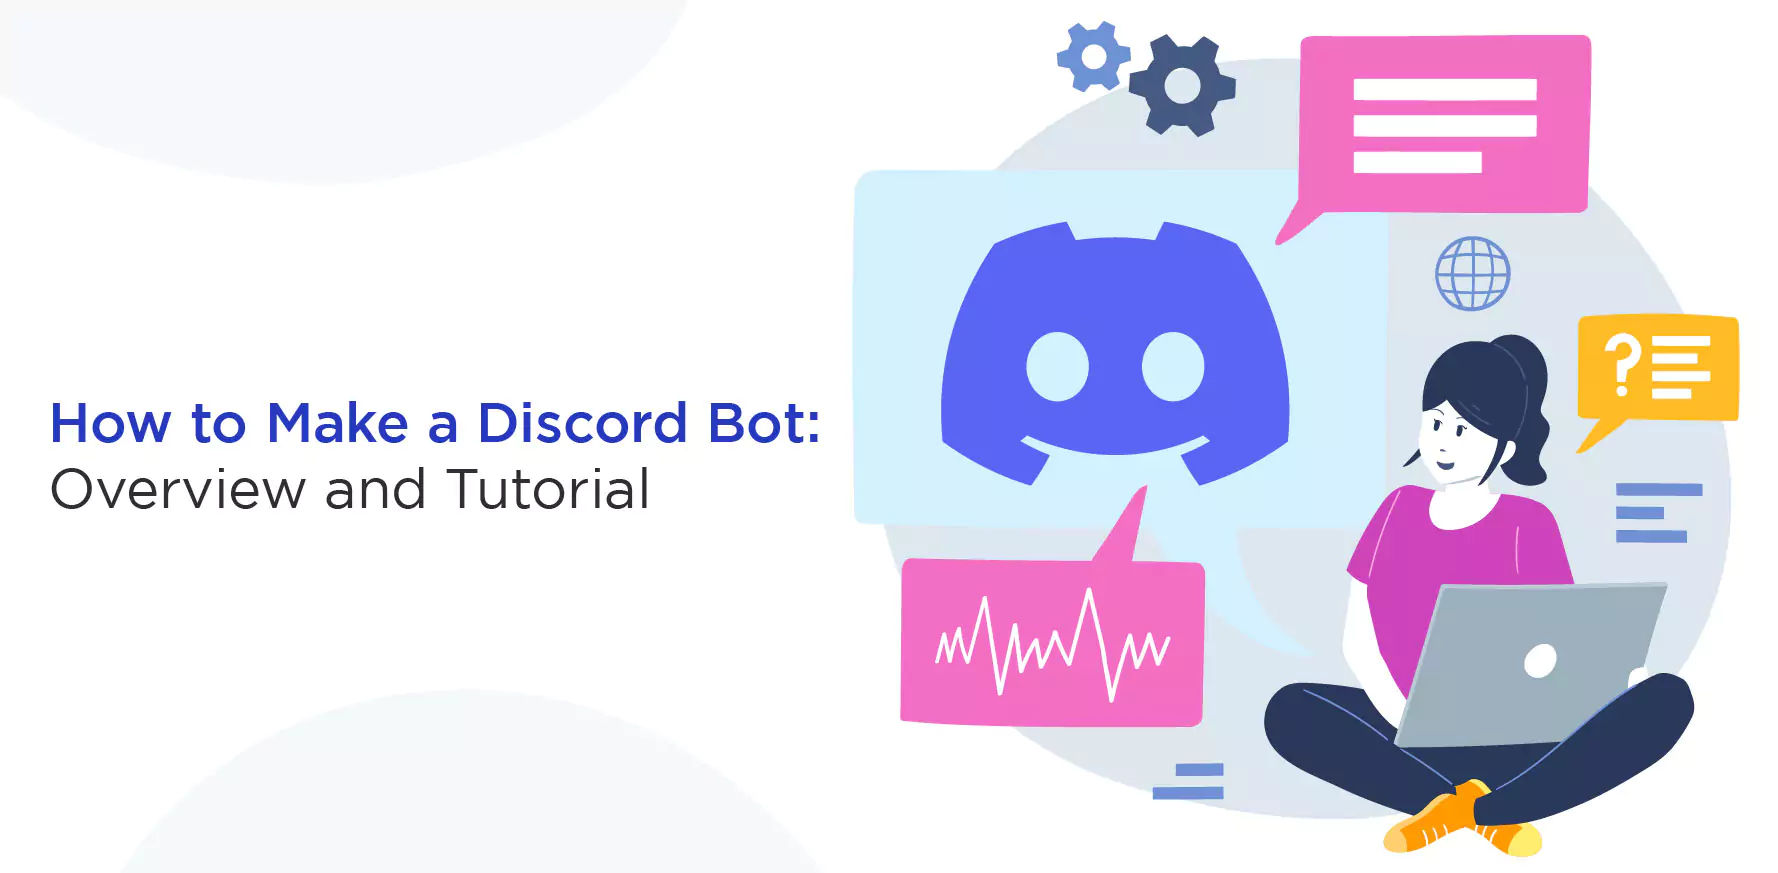 10 Best music bots for Discord 2023, by BotPenguin